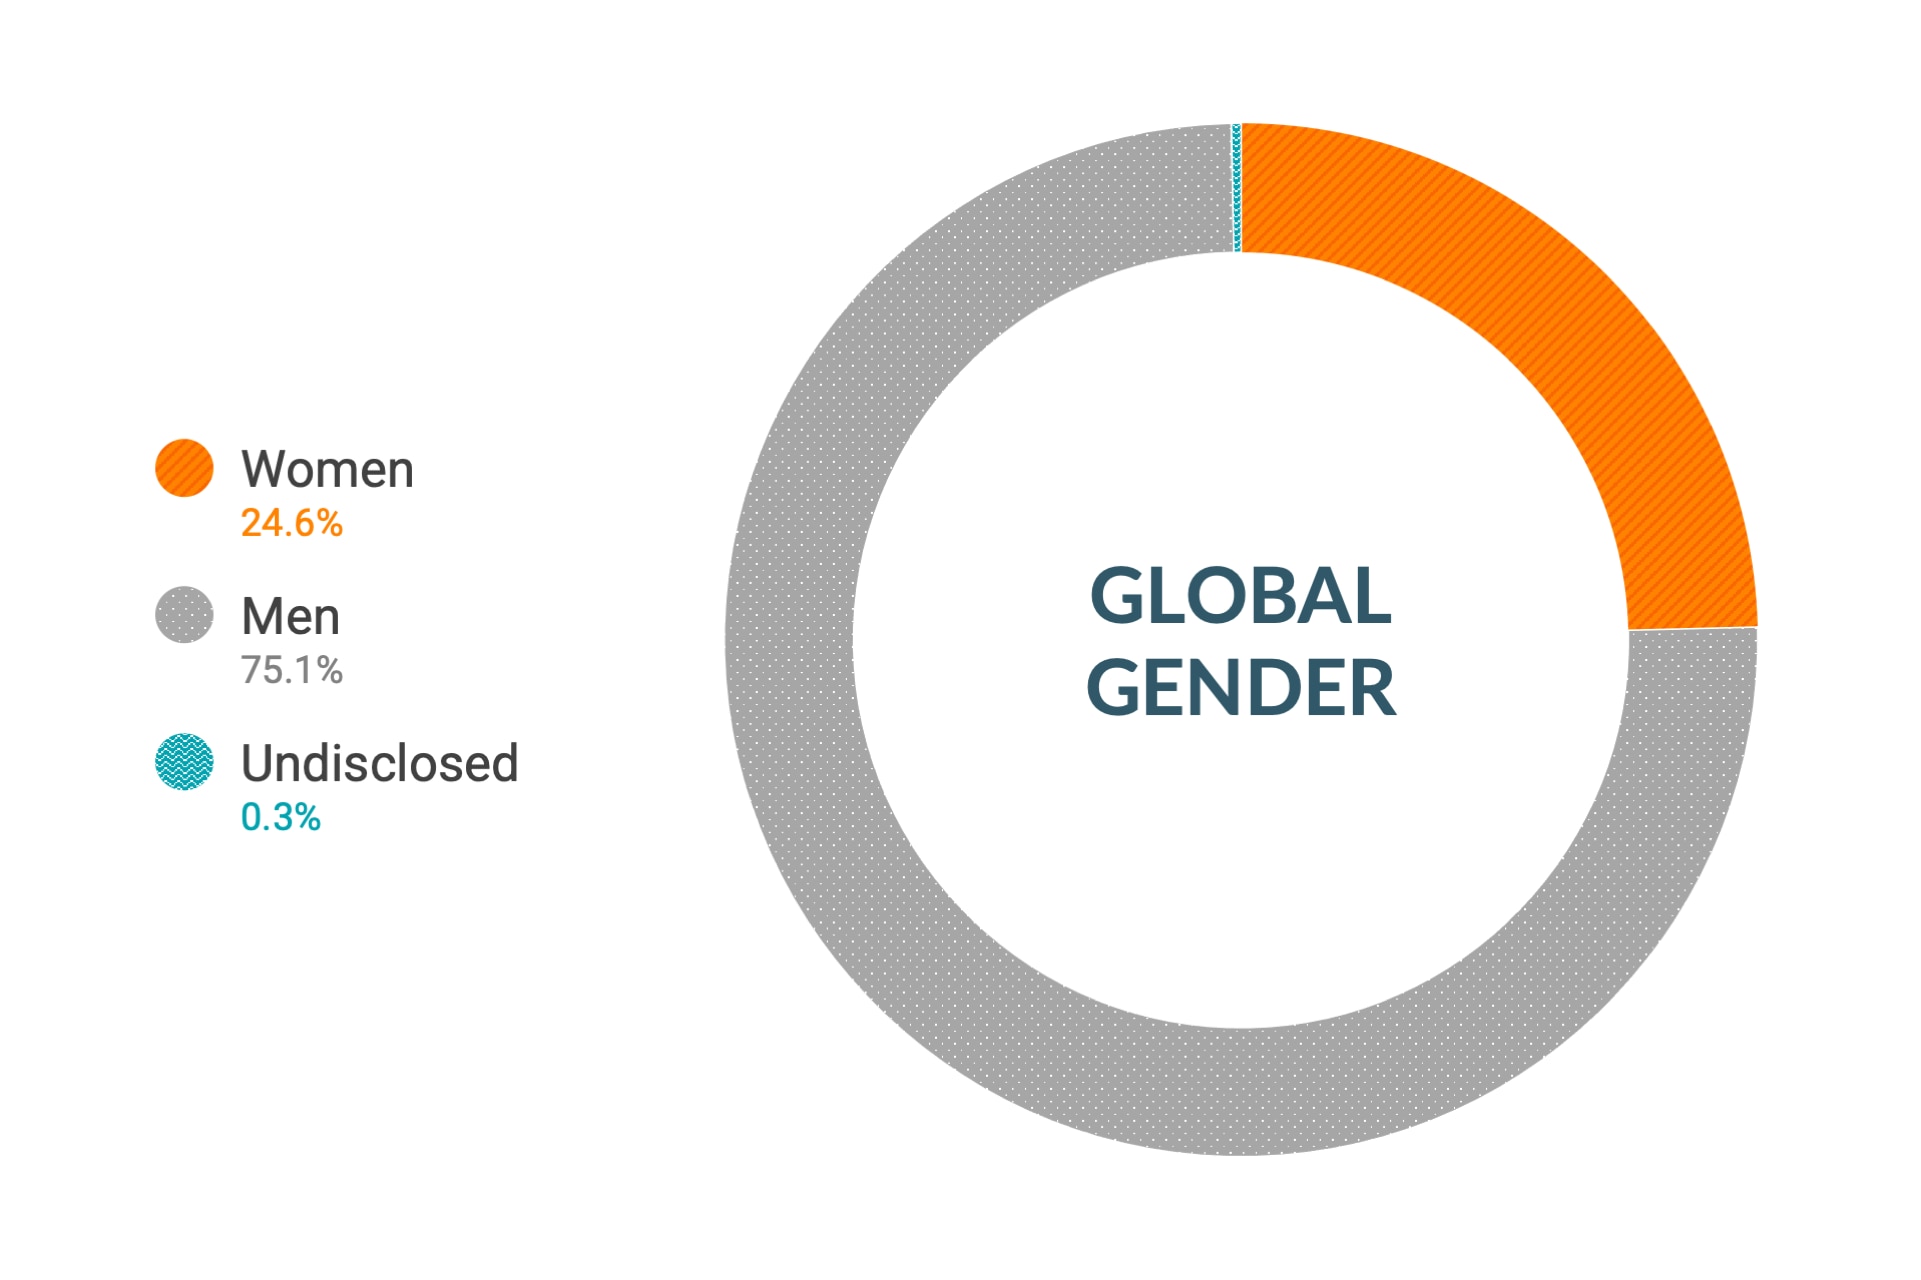 Cloudera Diversity and Inclusion data for Global Gender: Women 24.6%, Men 75.1%, Undisclosed 0.3%